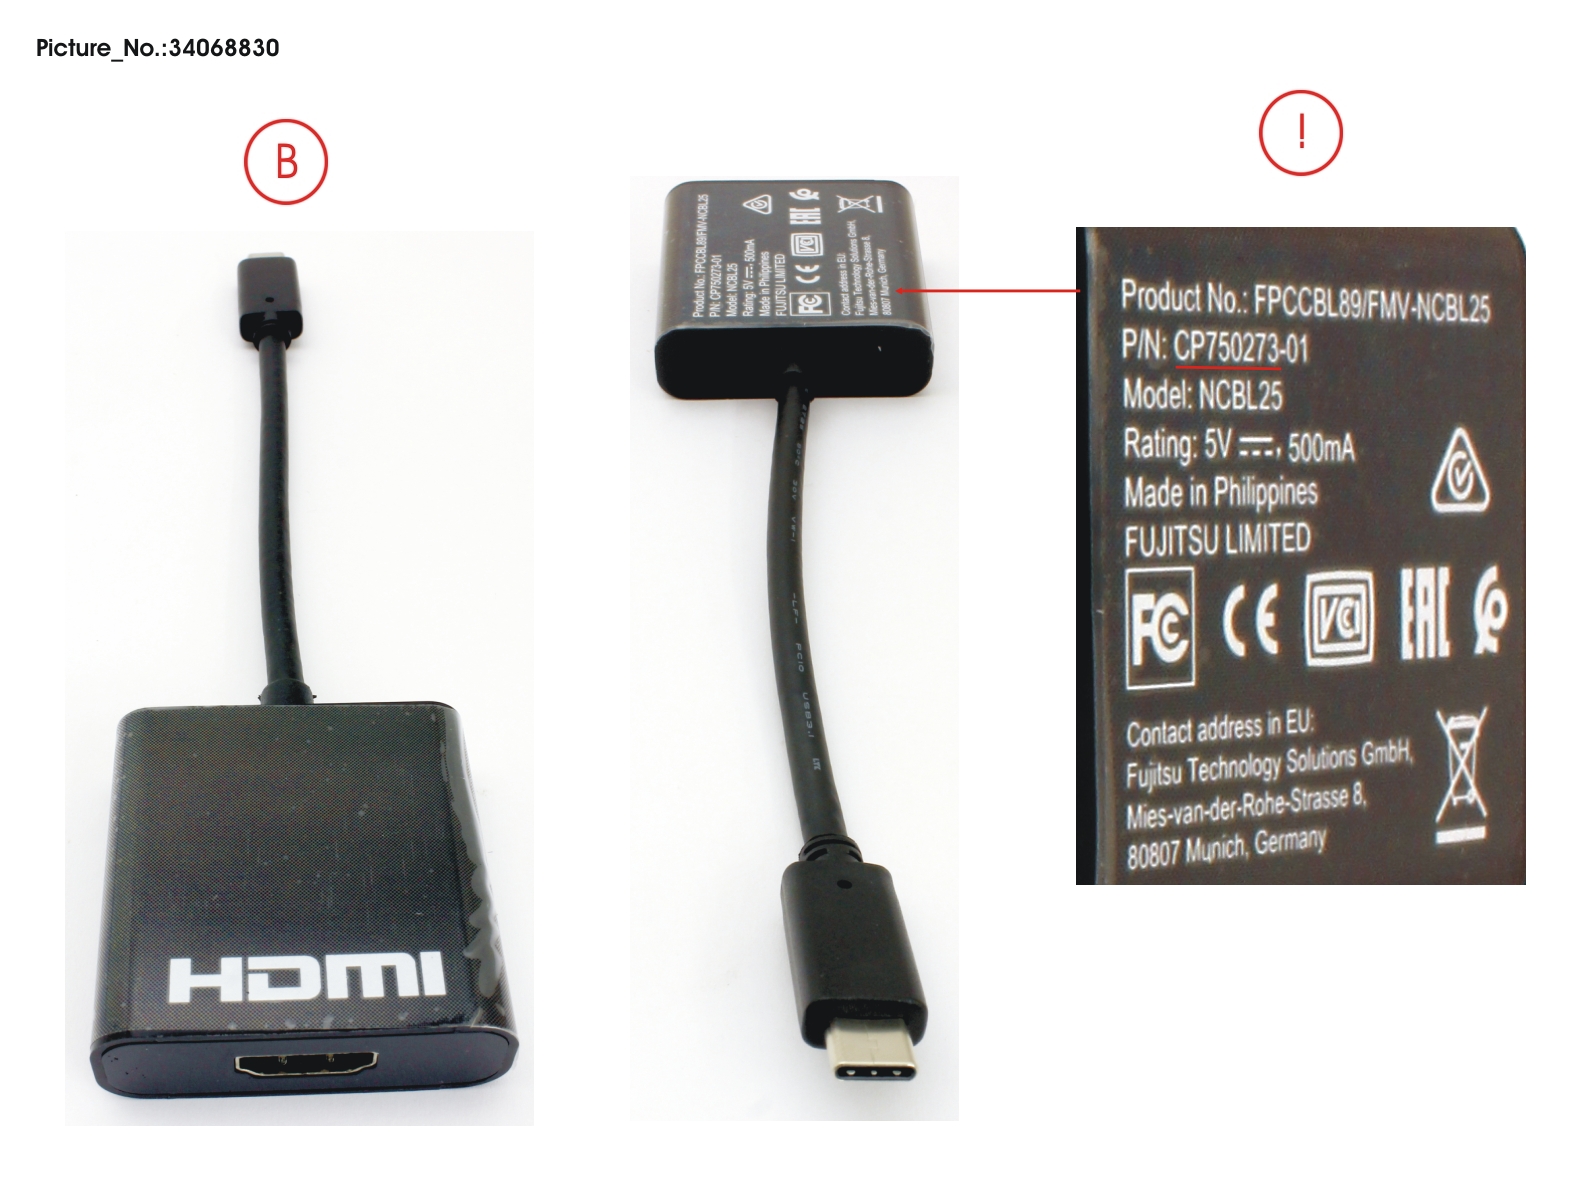 CABLE, HDMI ADAPTER (USB TYPE-C TO HDMI)